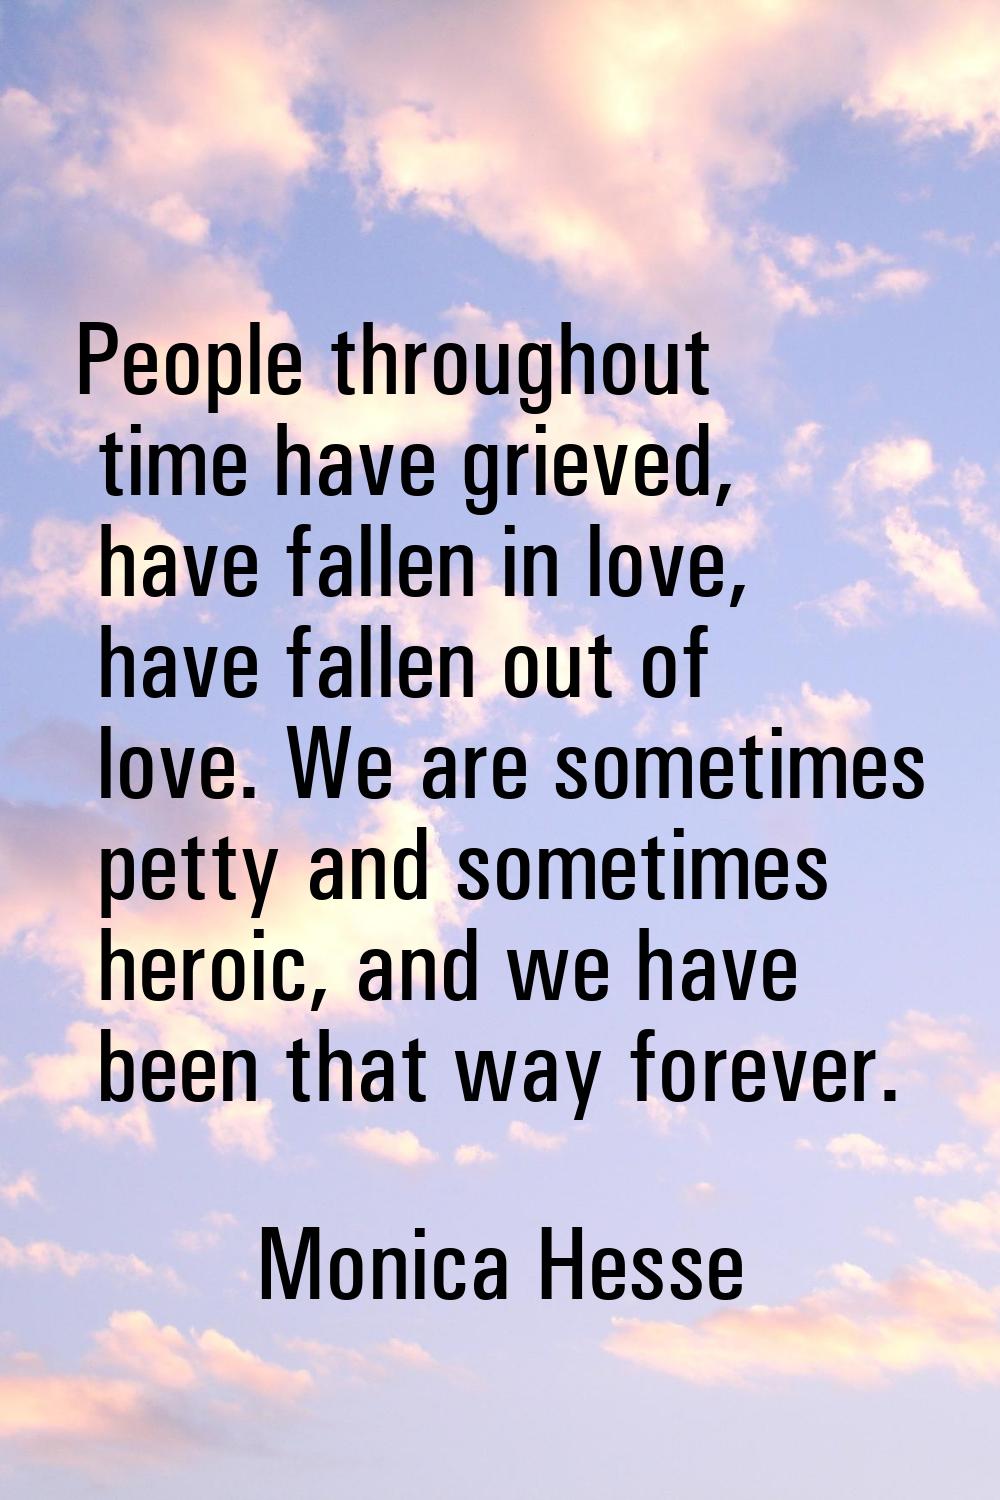 People throughout time have grieved, have fallen in love, have fallen out of love. We are sometimes